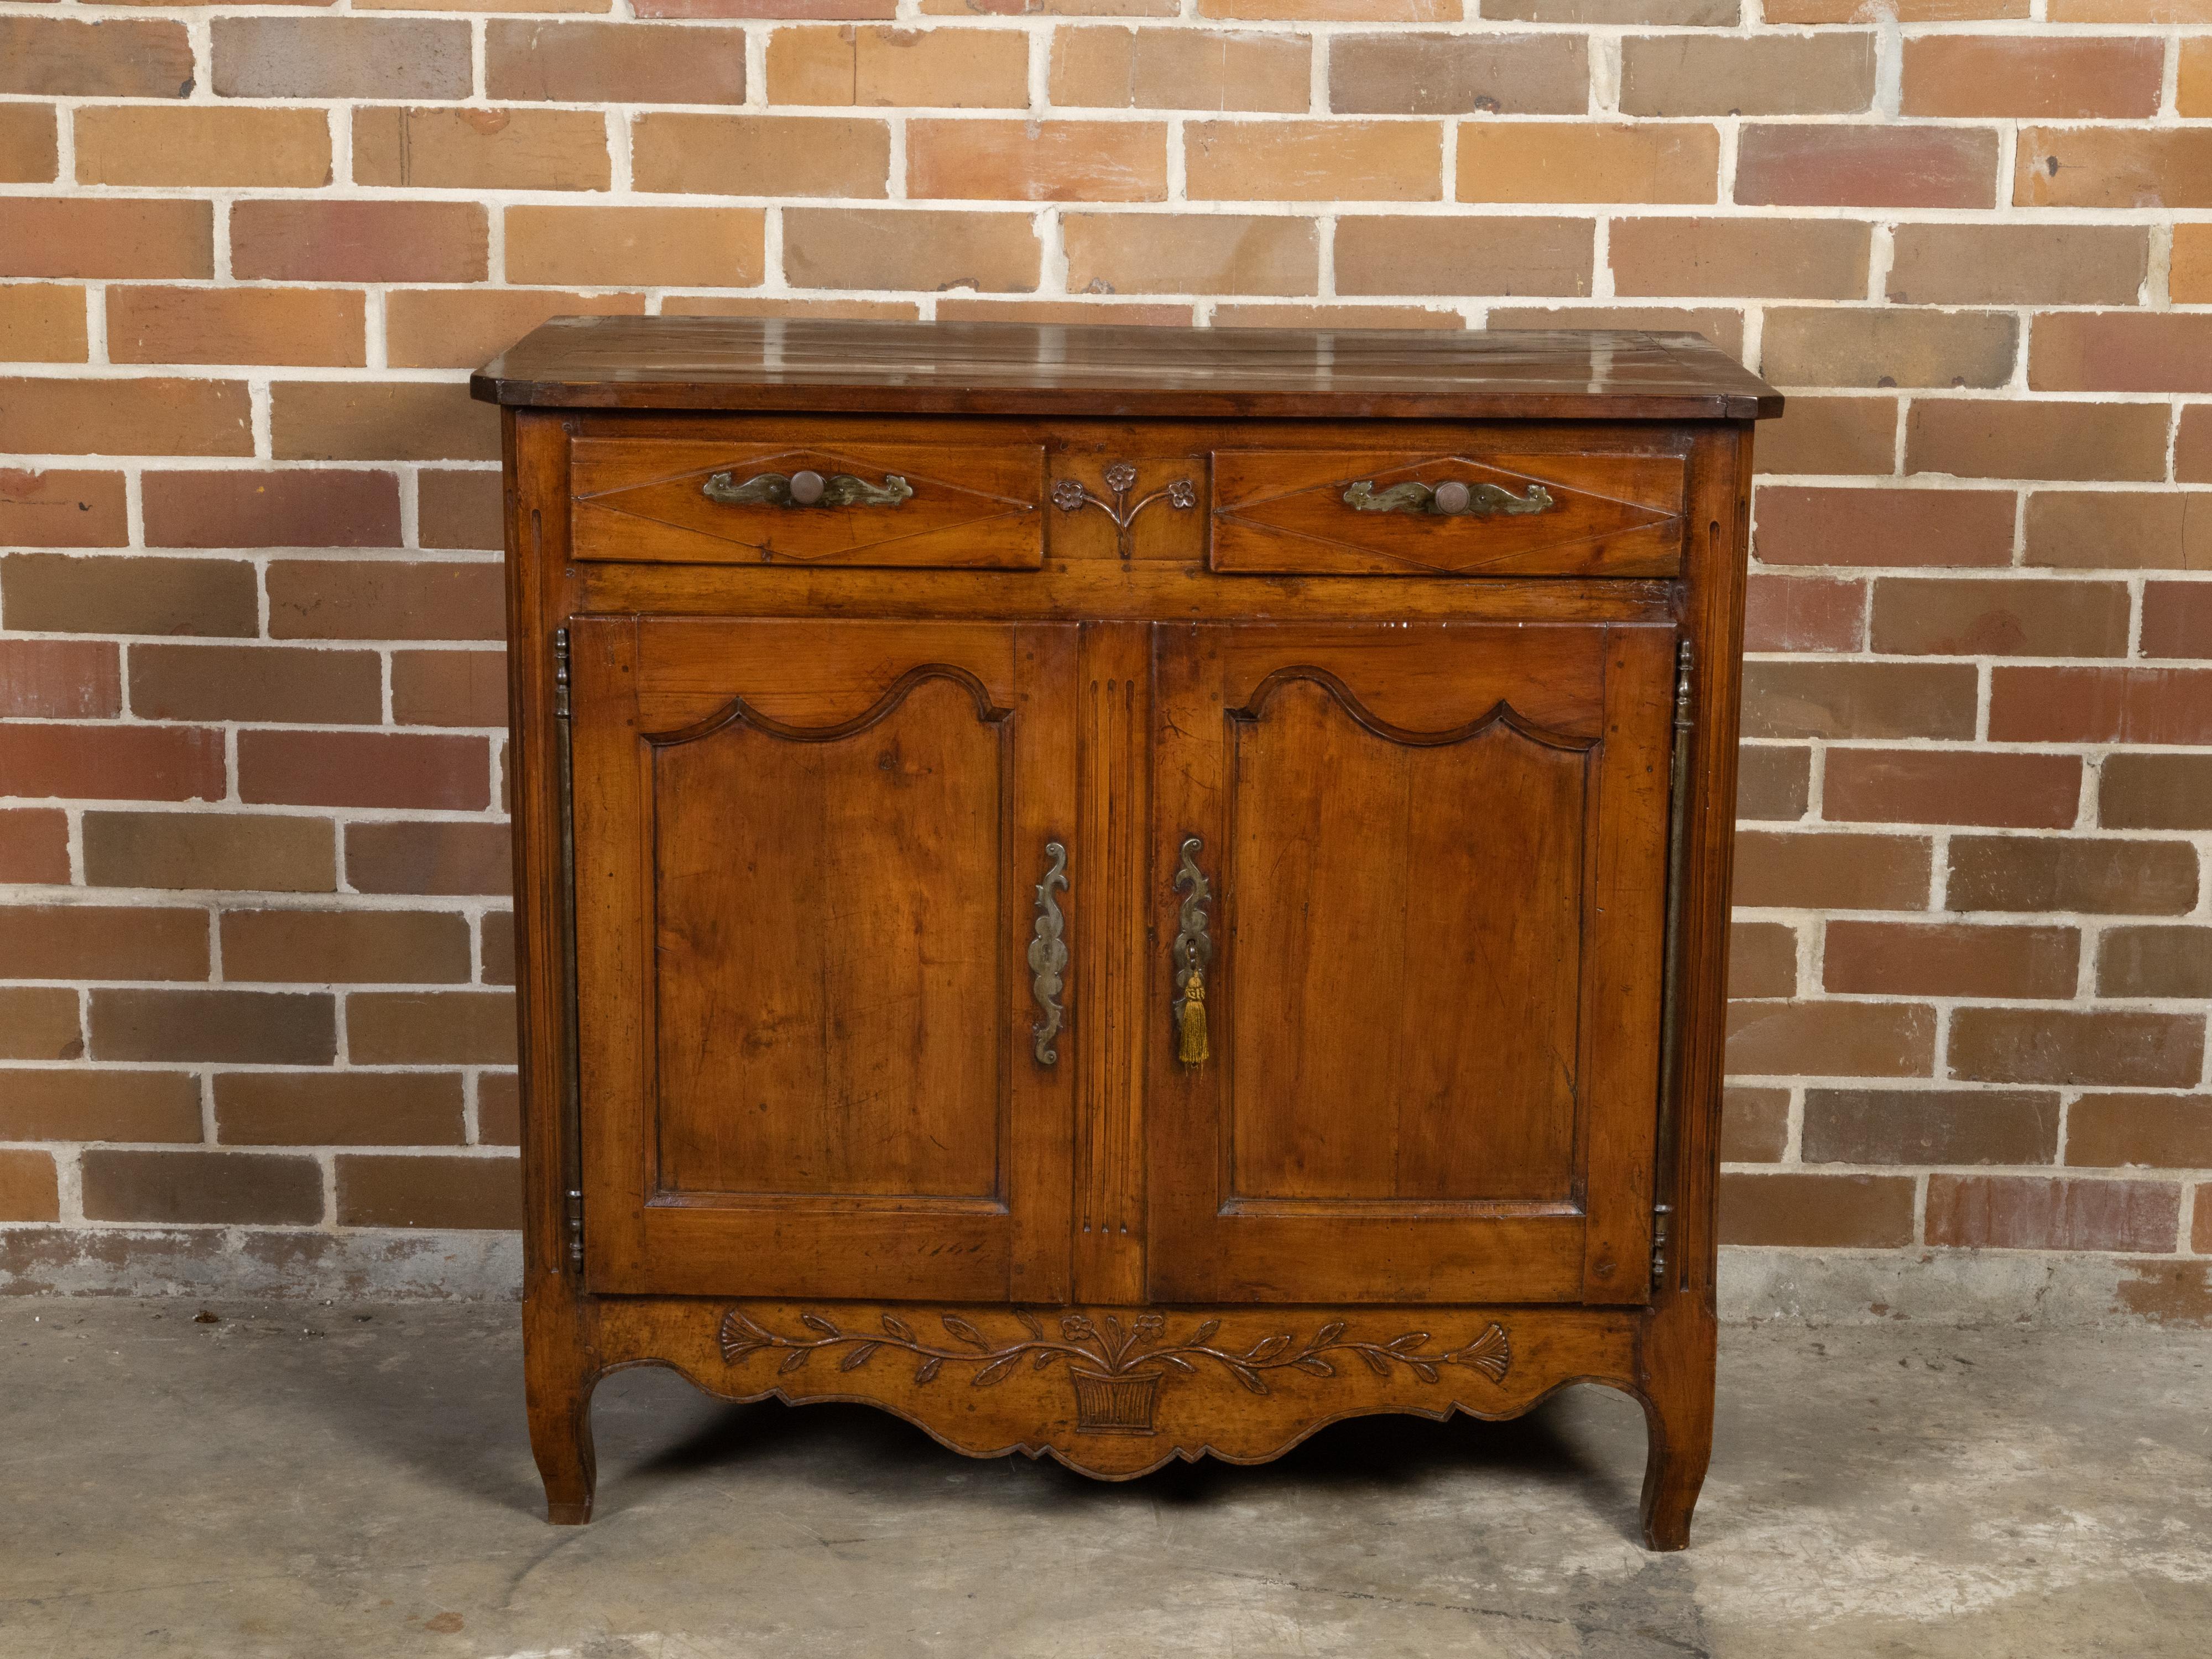 A French walnut buffet from the 18th century, with carved floral motifs, two drawers and two doors. Created in France during the reign of King Louis XV in the 18th century, this walnut buffet features a rectangular top with canted corners in the